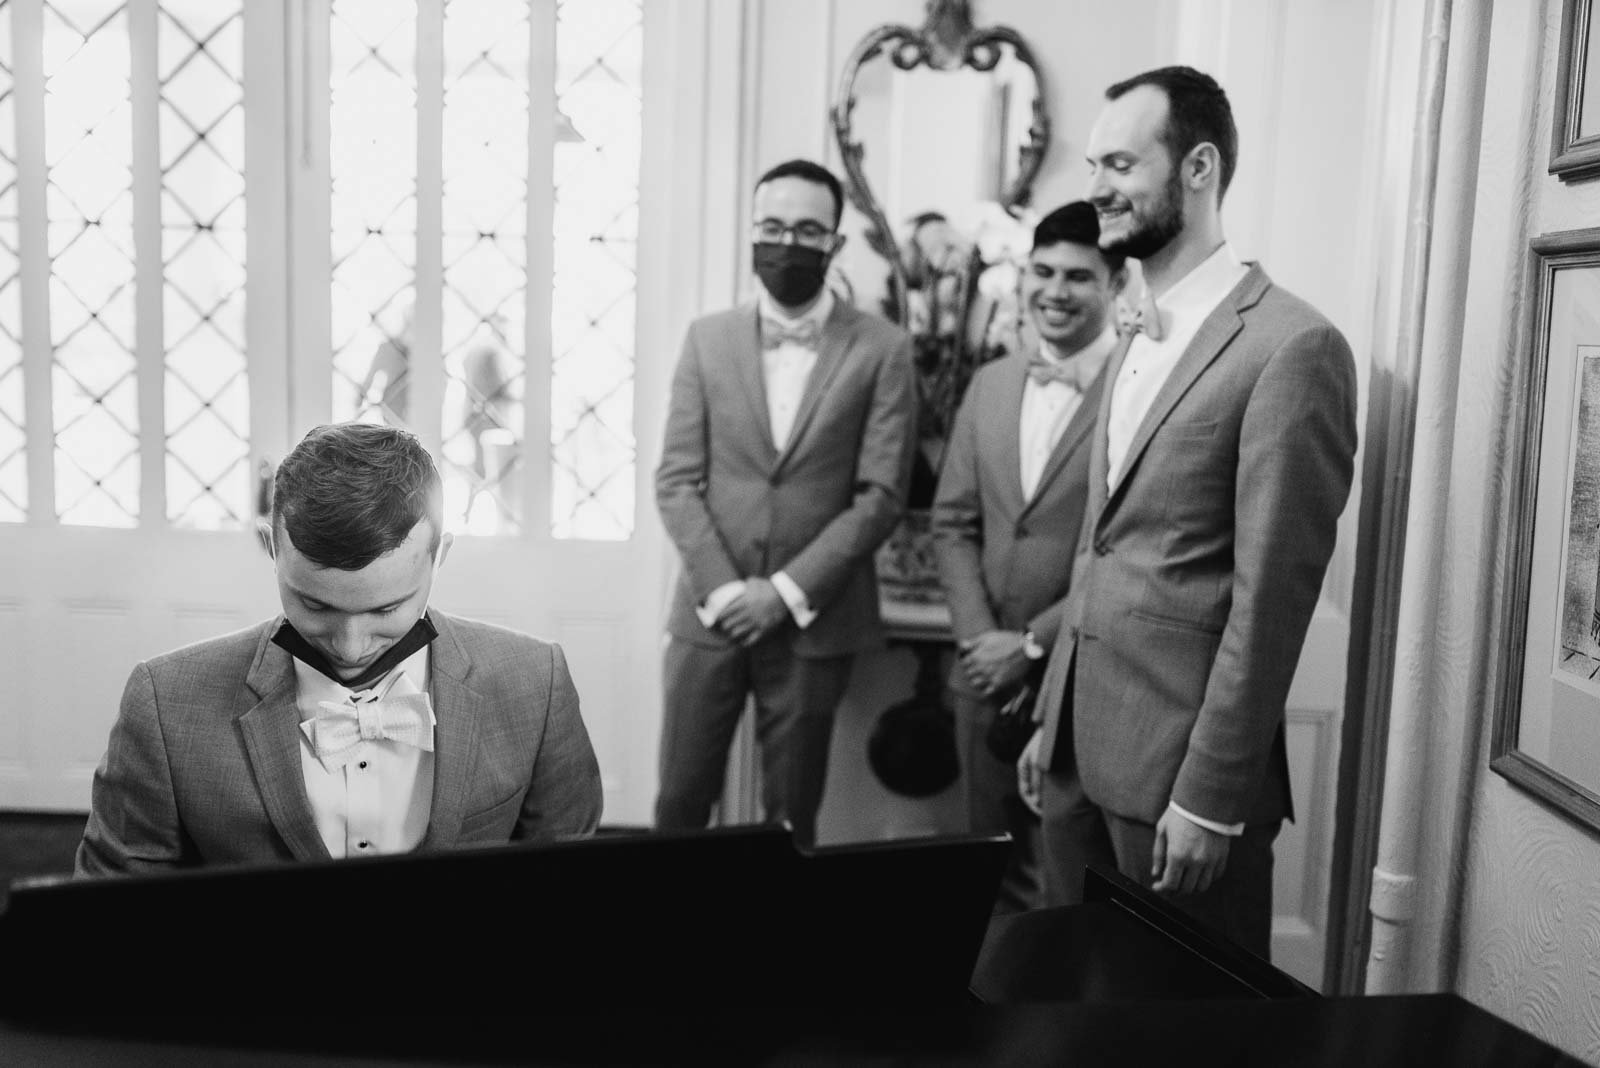 The groom plays on the Steinway piano at The Argyle as the groomsmen stand behind him :-)